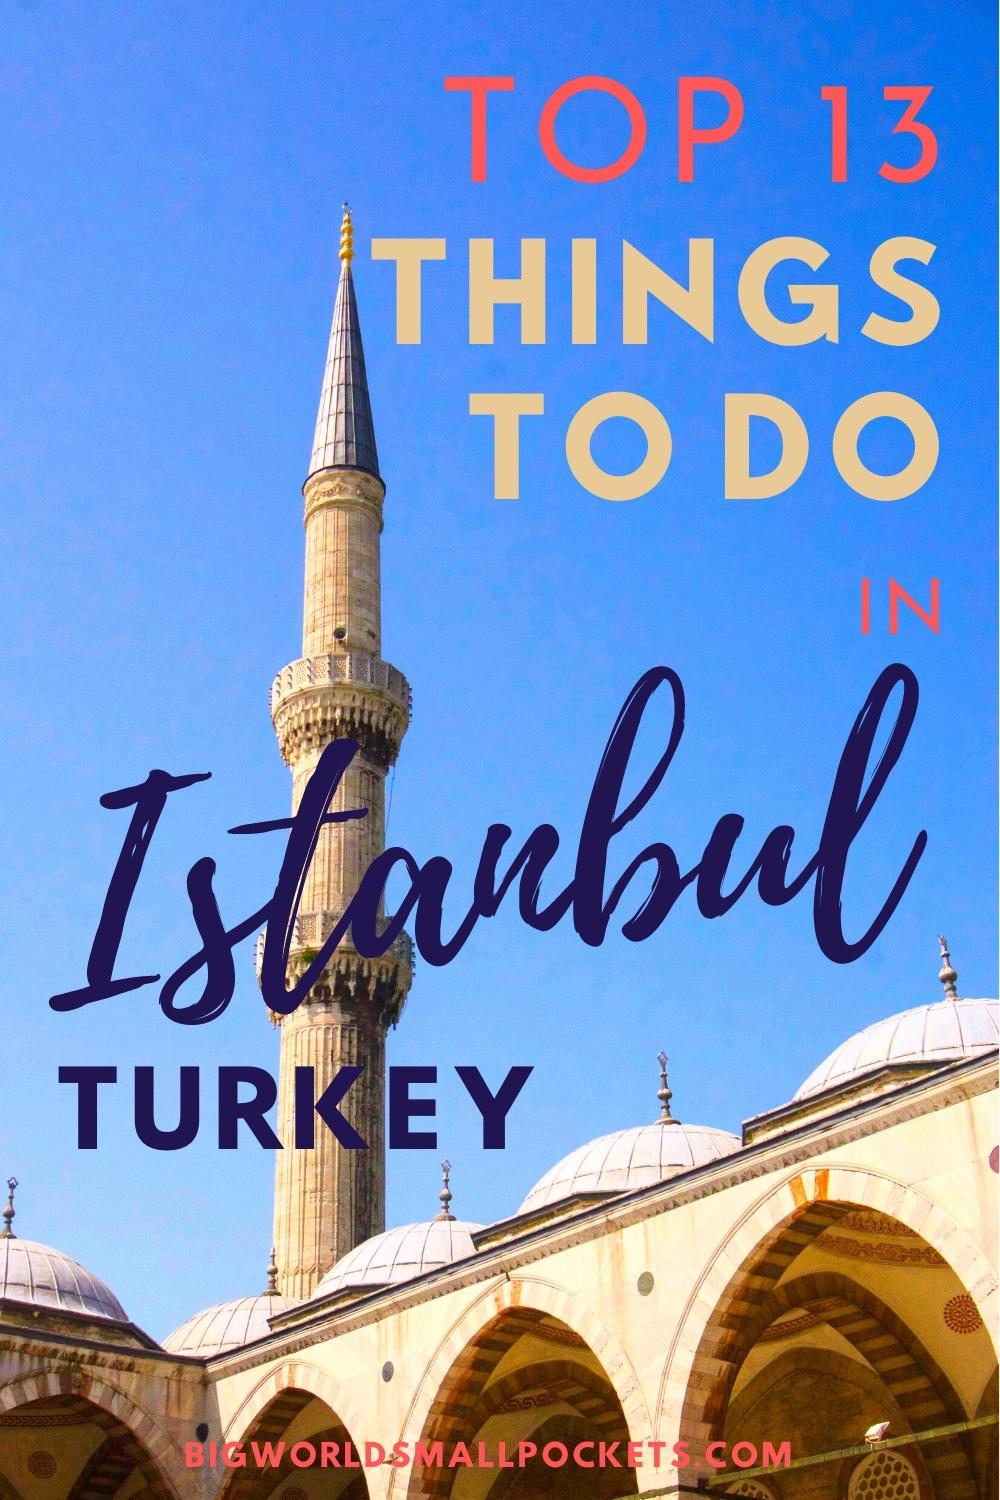 Top 13 Things to Doc in Istanbul for First Timers